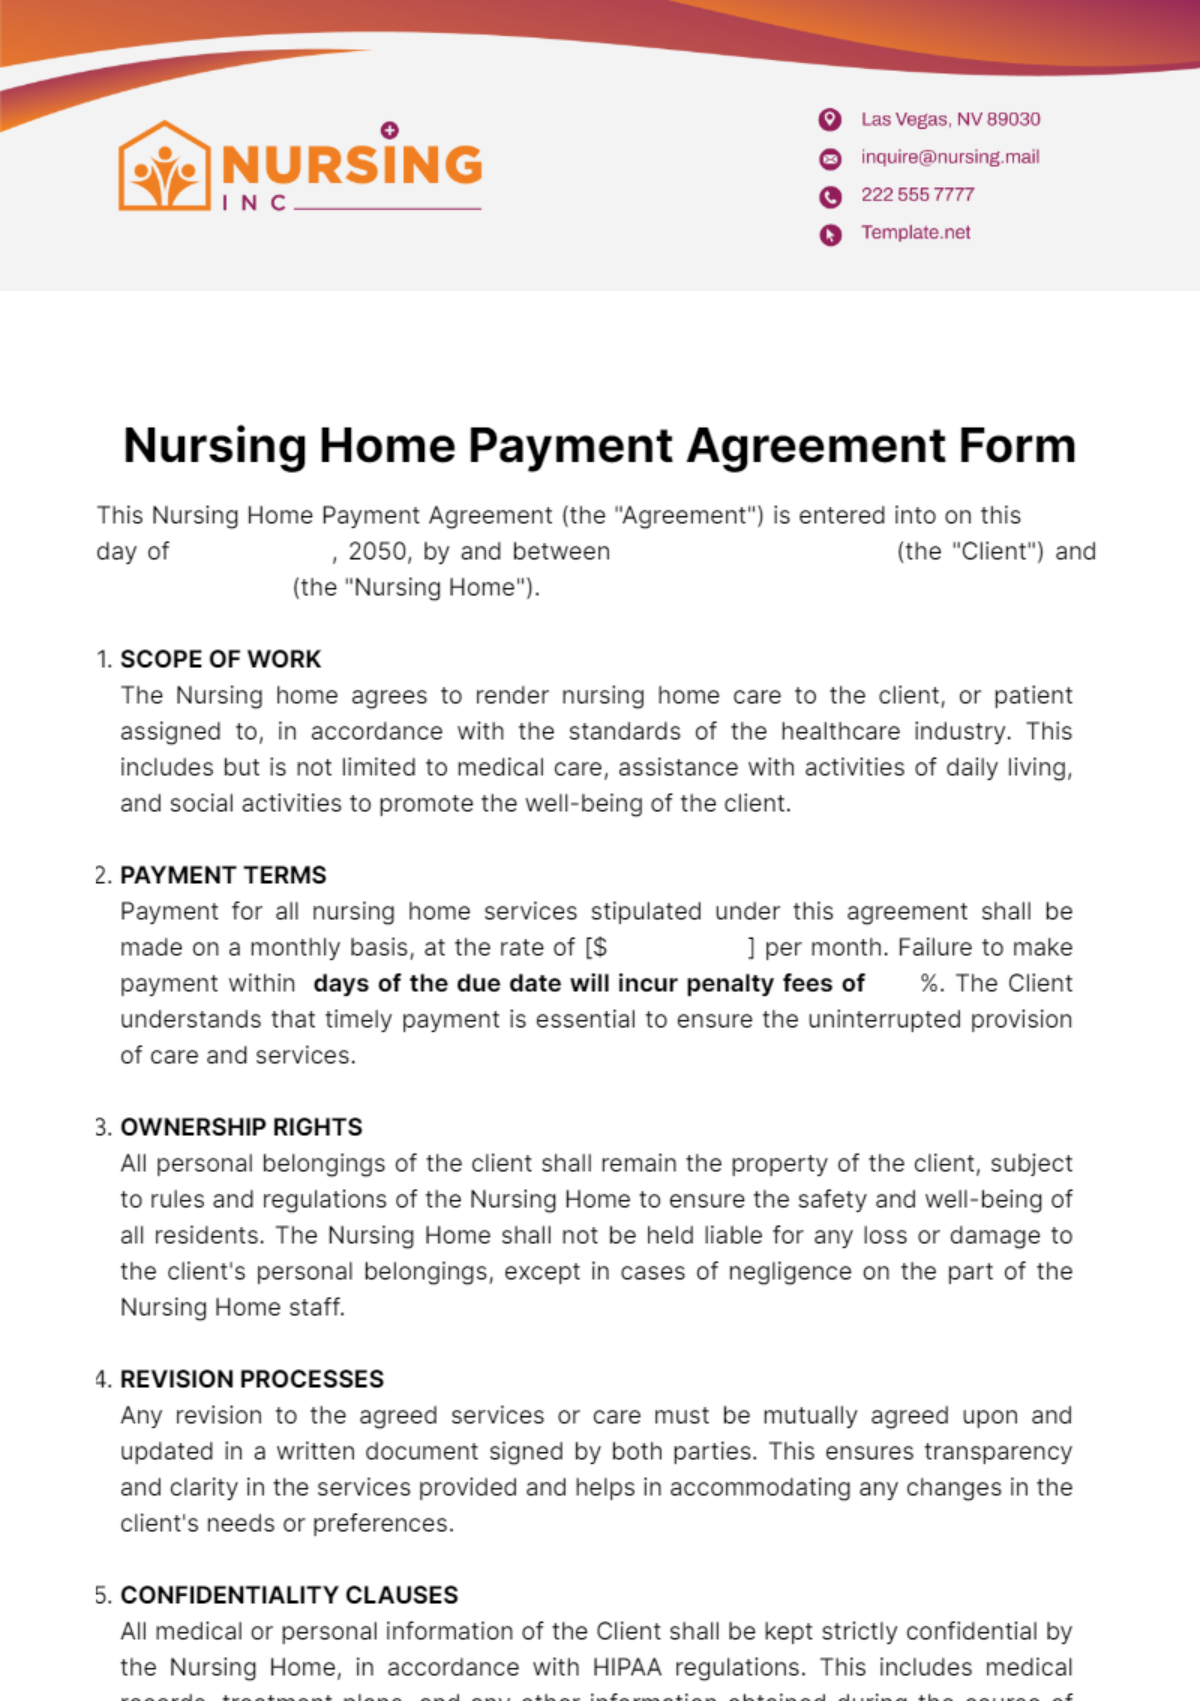 Free Nursing Home Payment Agreement Form Template